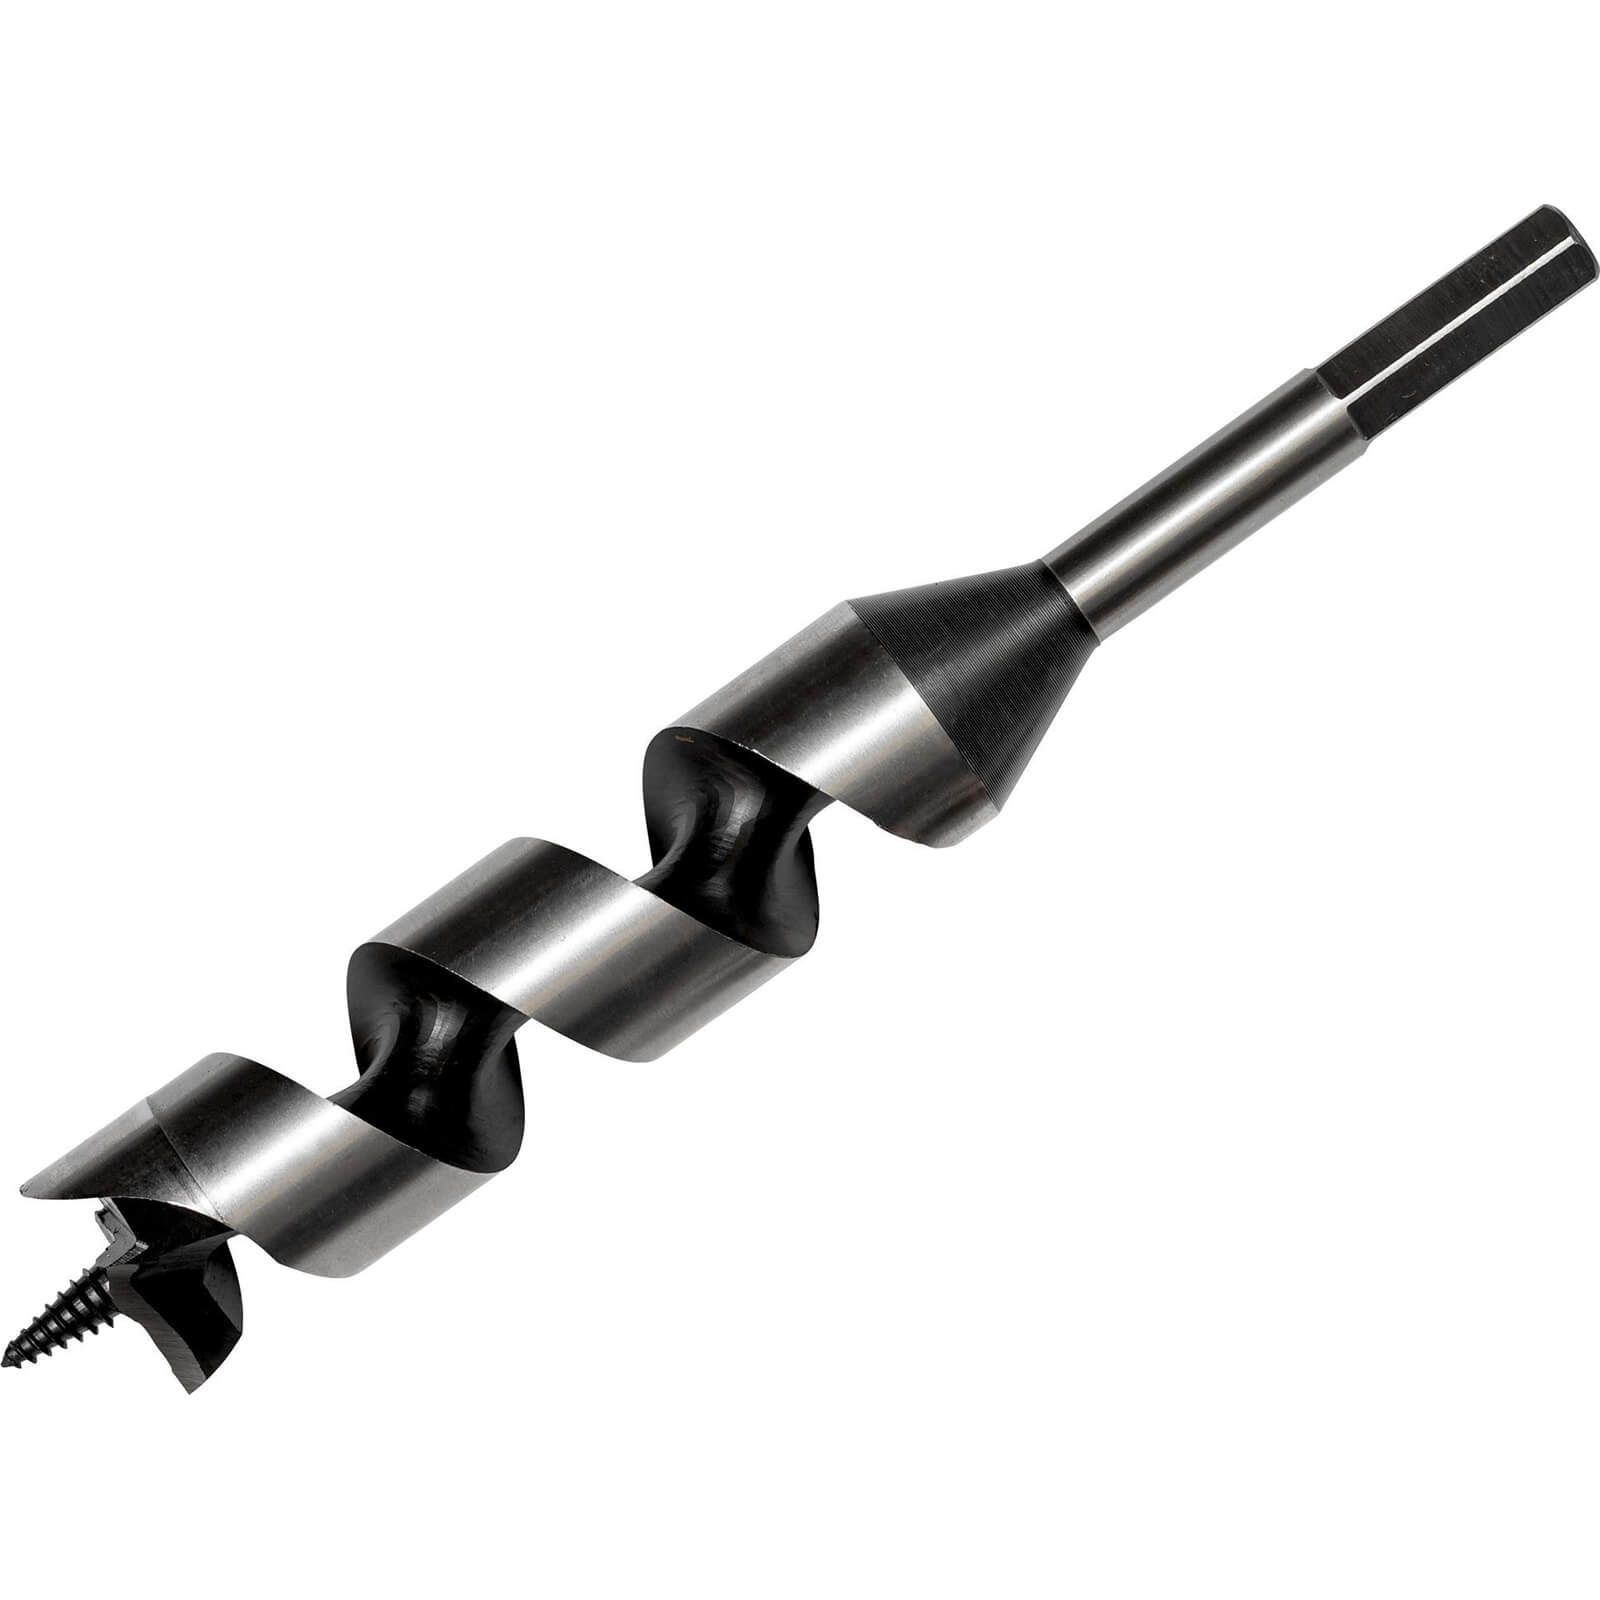 Photo of Bahco 9626 Series Combination Auger Drill Bit 22mm 230mm